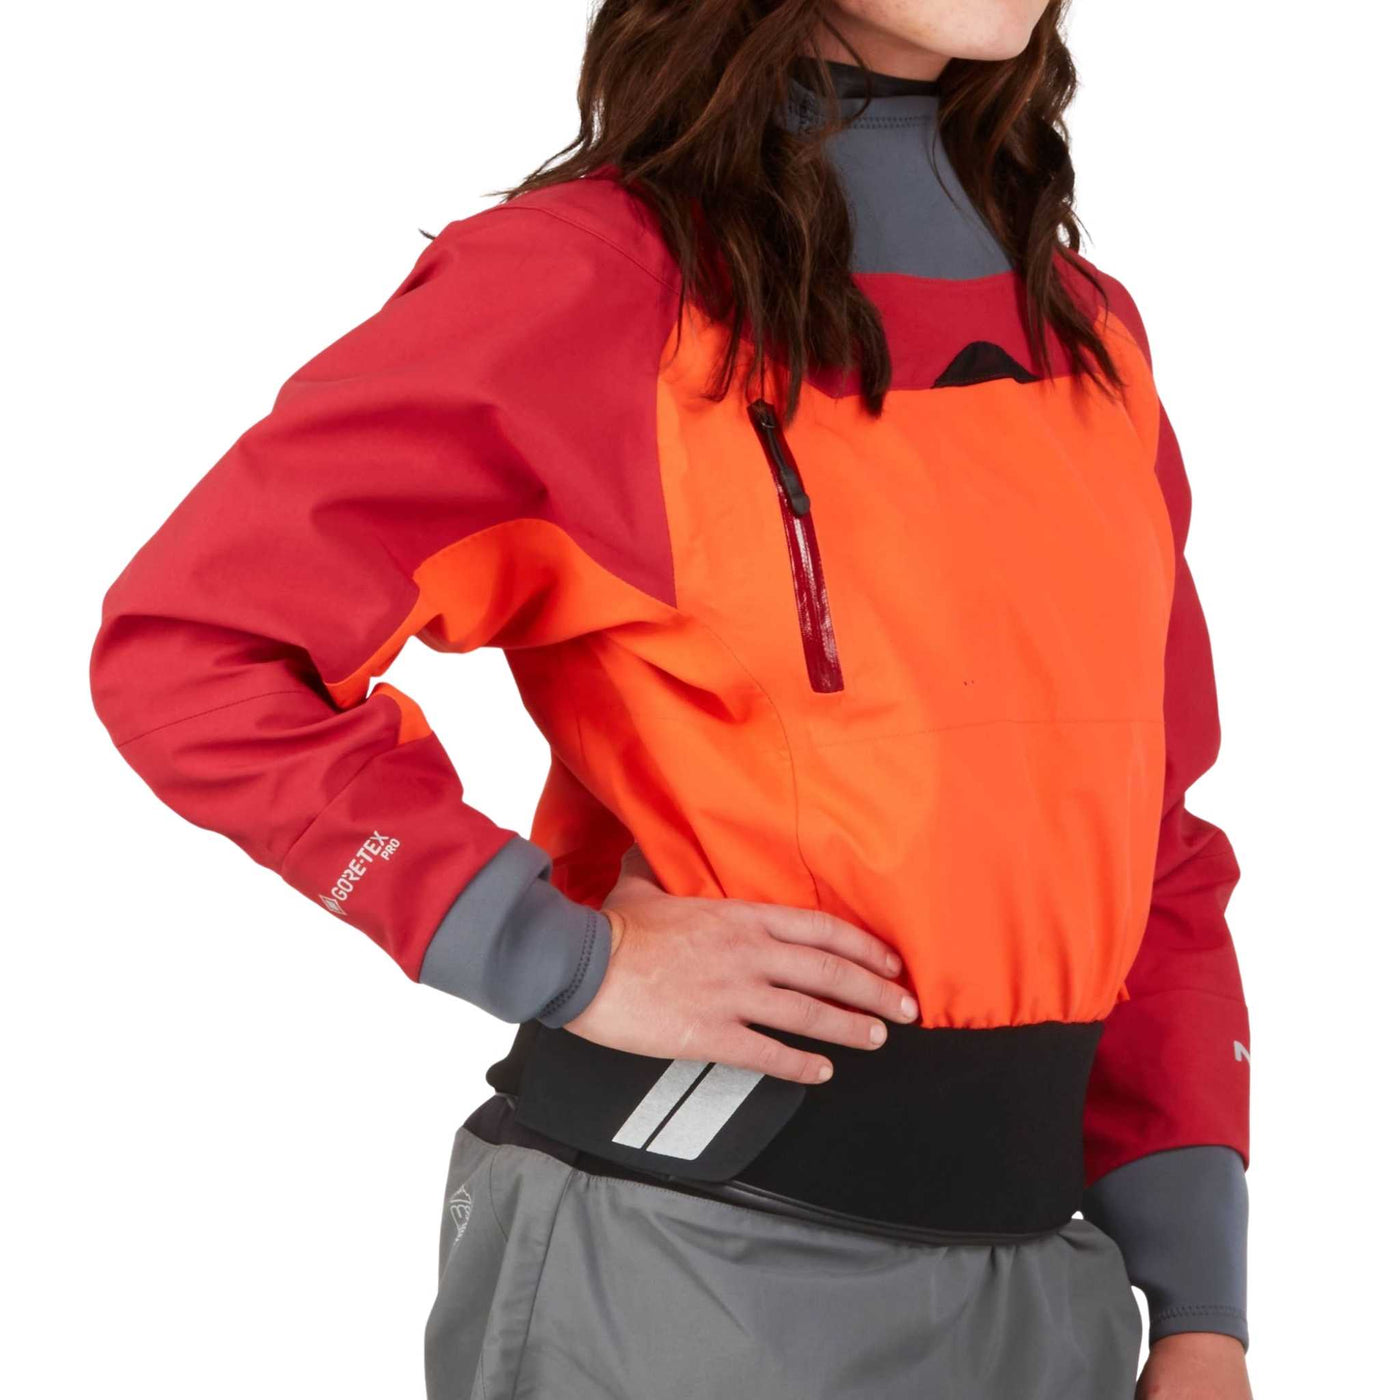 NRS Rev Gore-Tex Pro Dry Top - Womens | Paddle Dry Jacket | Further Faster Christchurch NZ #poppy-vino